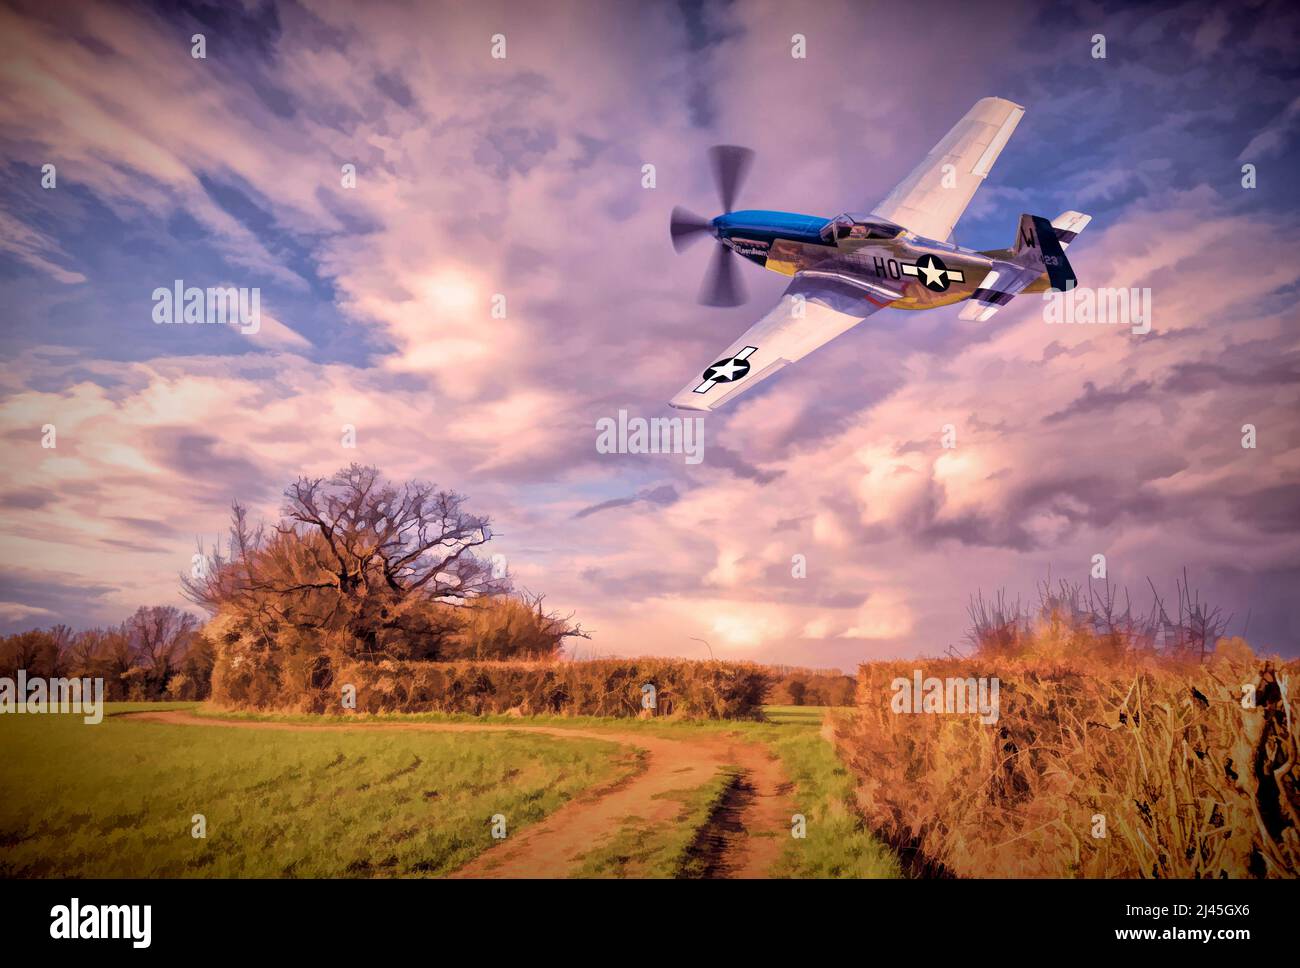 P51 mustang aircraft flying low over the British countryside. Stock Photo